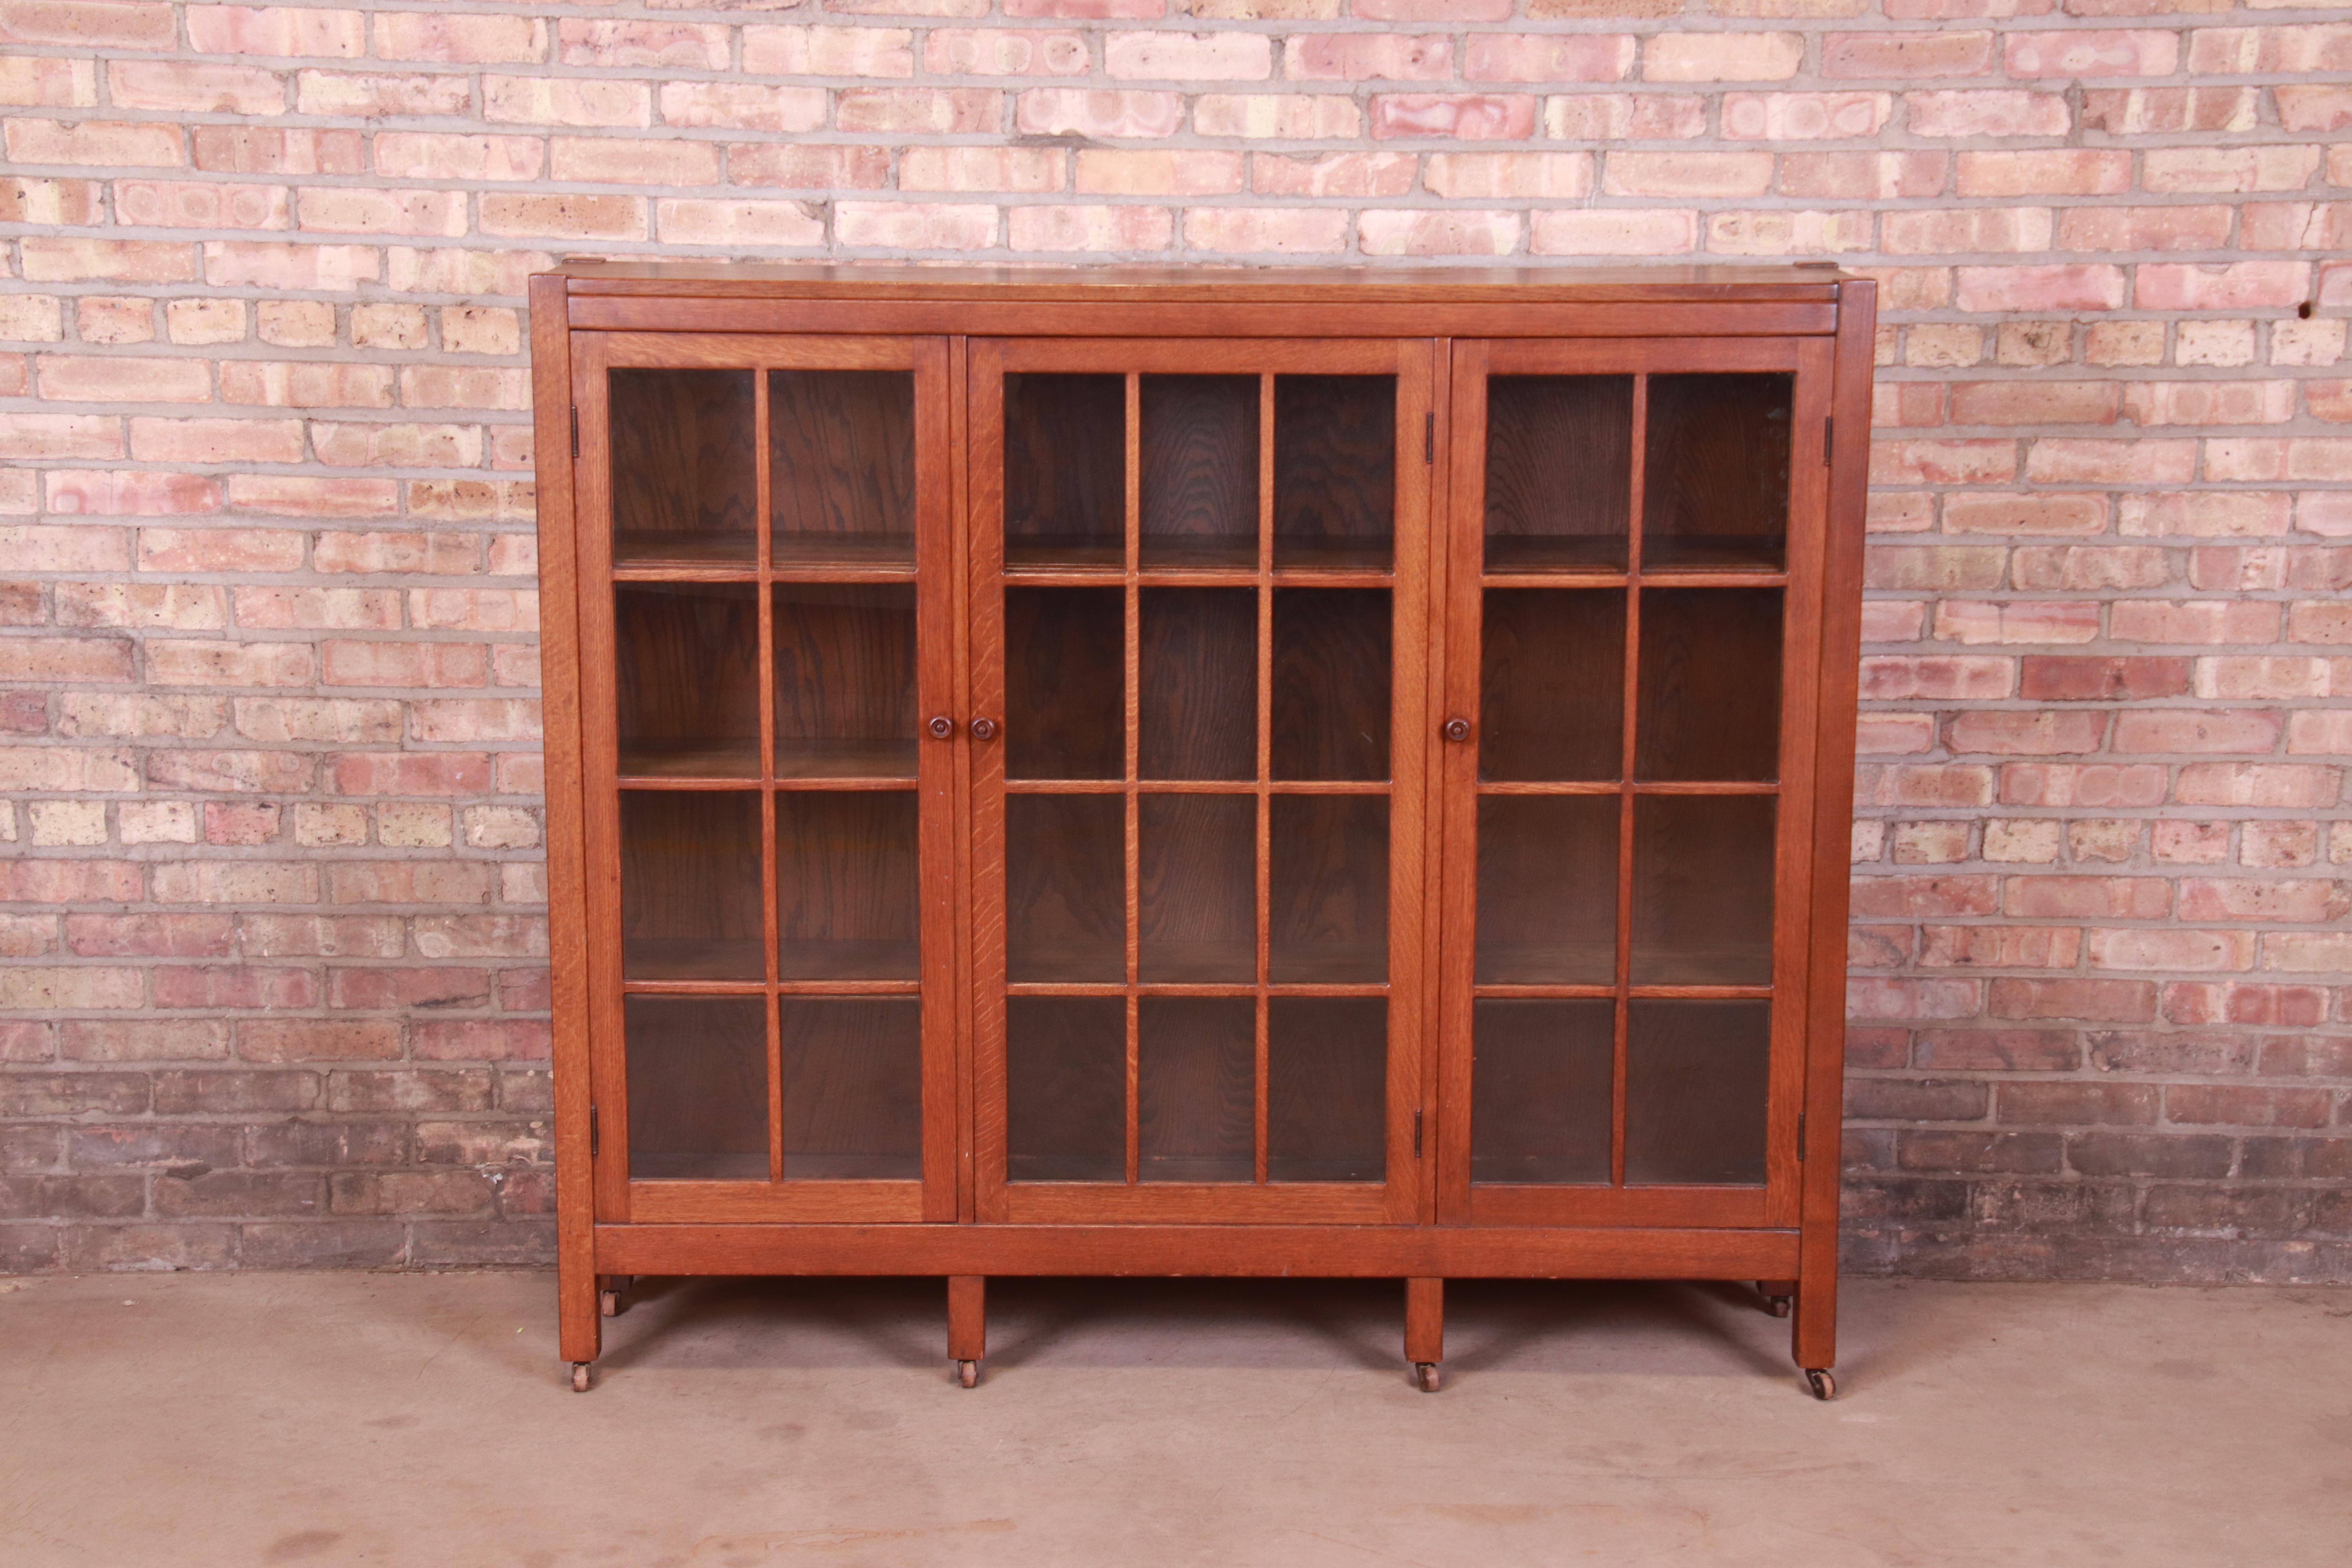 A gorgeous Stickley style antique Arts & Crafts triple bookcase cabinet

By Rockford National Furniture Co. and retailed by Mandel Brothers, Chicago

USA, Circa 1900

Quarter sawn oak, with mullioned glass front doors.

Measures: 73